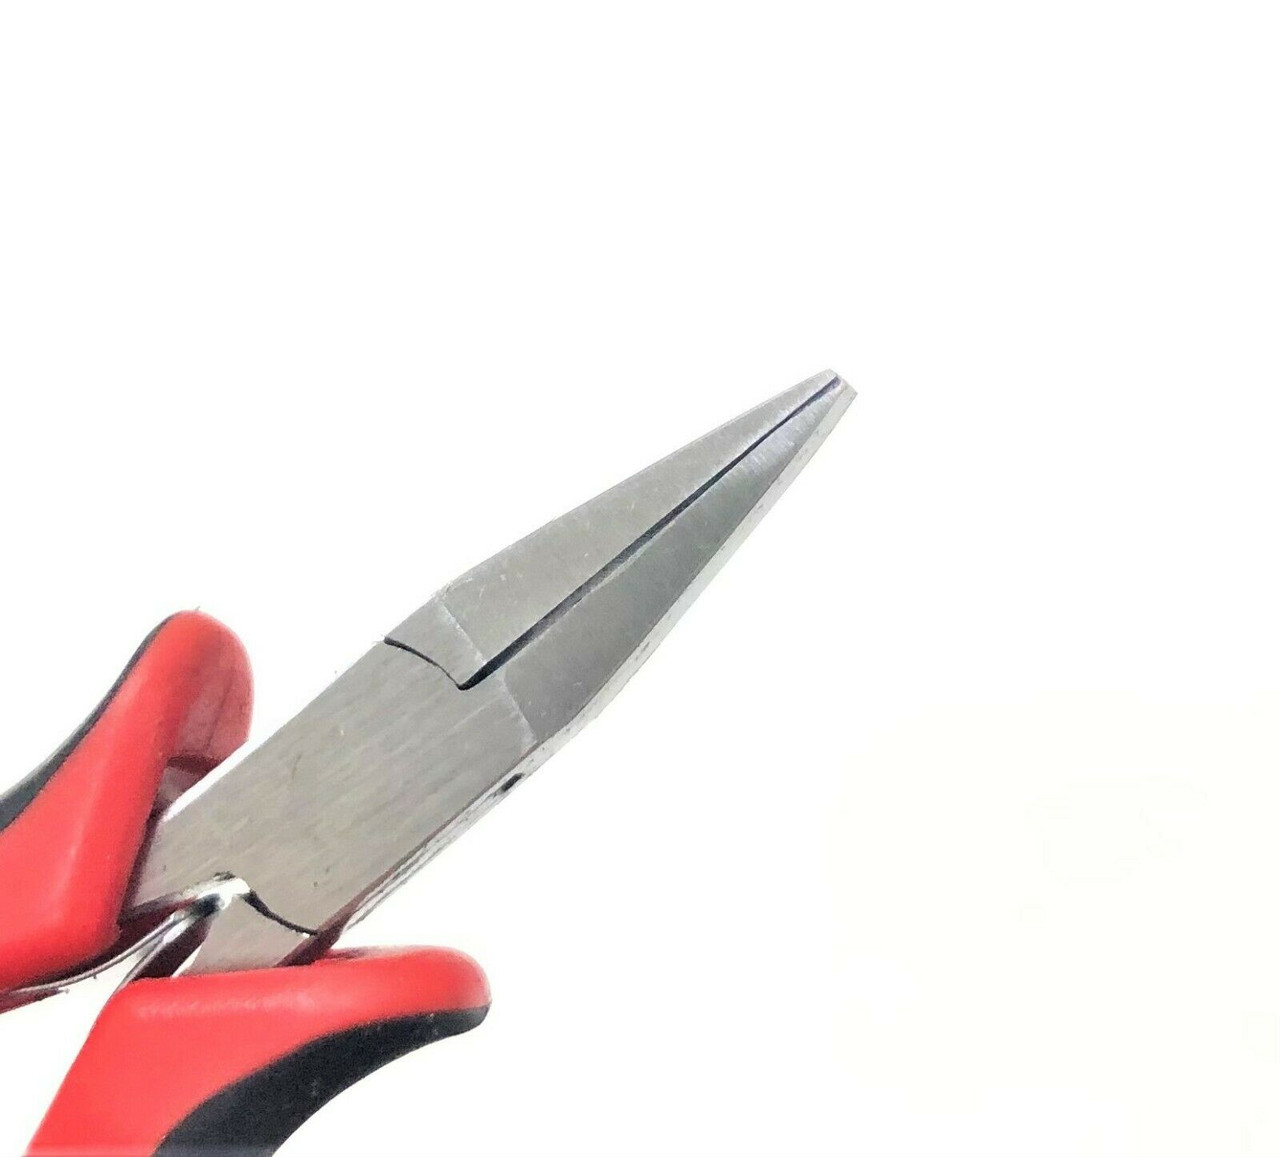 Needle Nose Pliers Images, Illustrations & Vectors (Free) - Bigstock